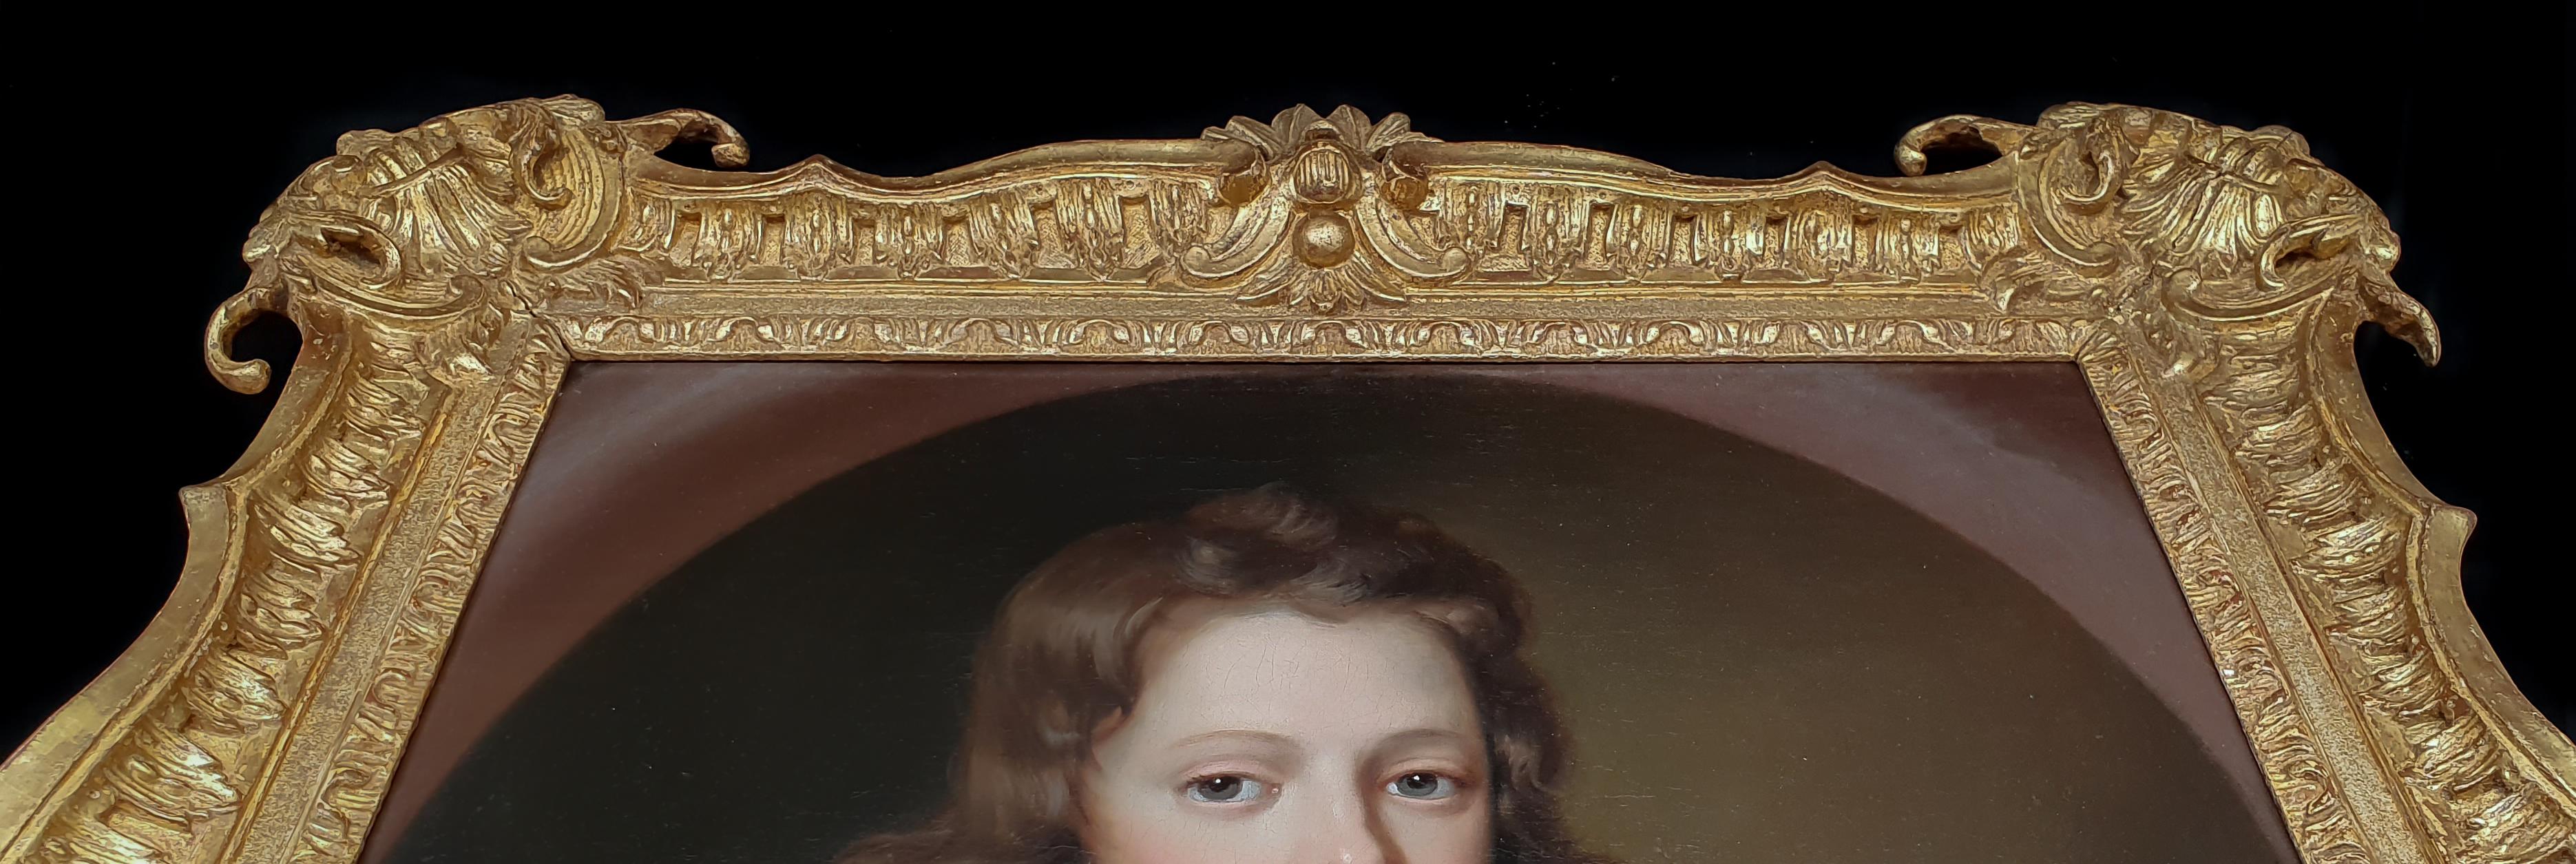 Portrait of a member of the Mellish family, Exquisite Quality, Fine Carved Frame 3